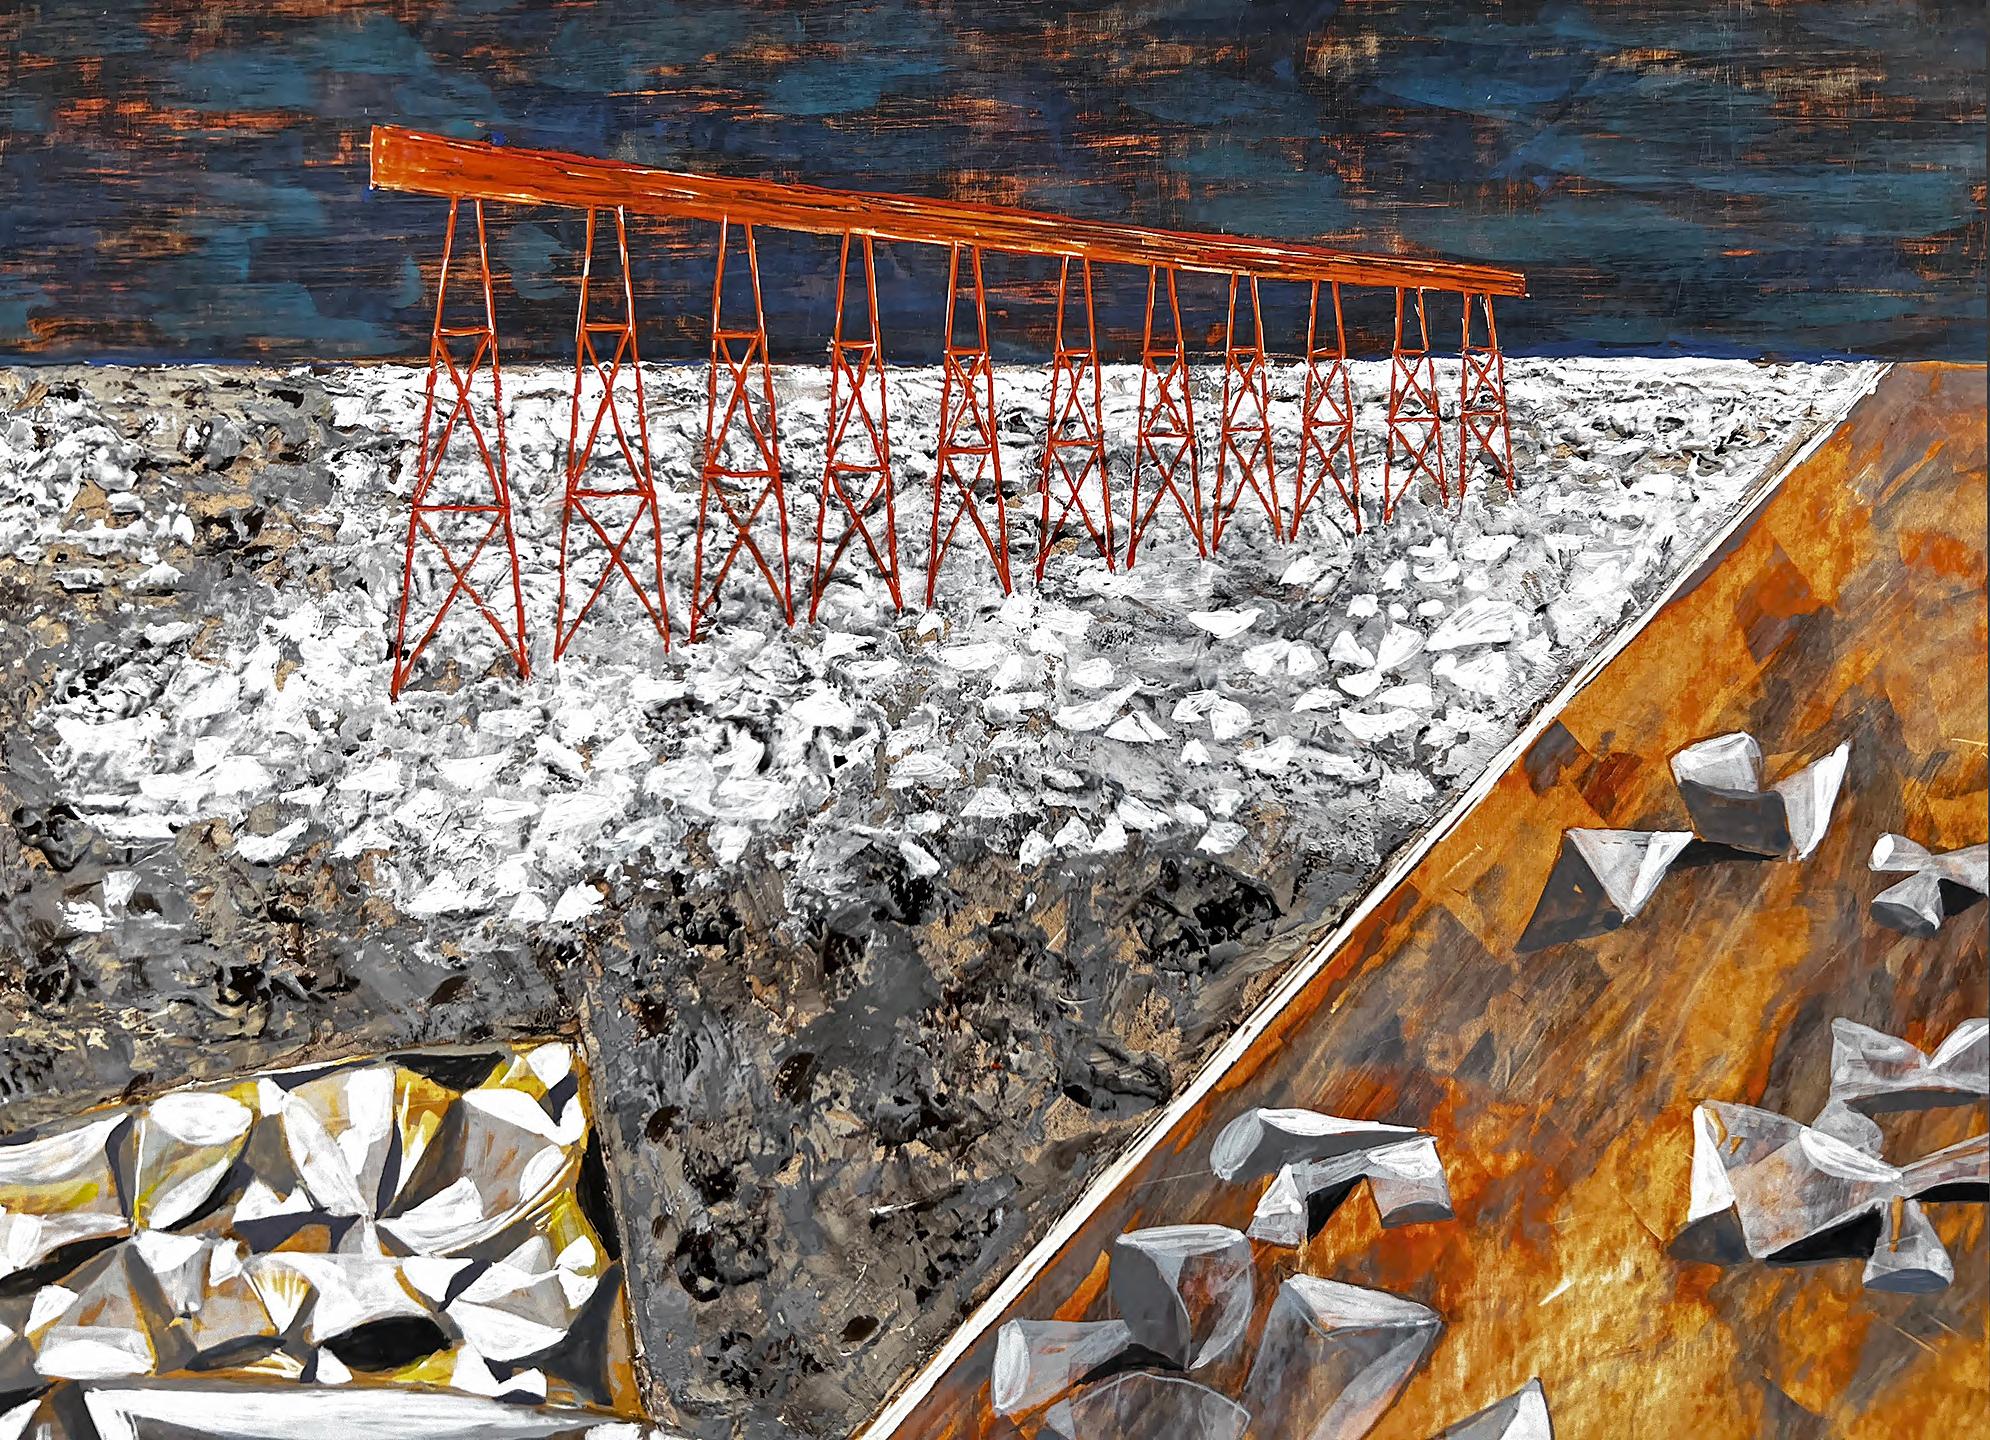 This meticulously planned, designed, and executed work depicts an ultra-wide angle view of a rock quarry/mine.  The viewer looks down at close-up-stylized rock formations and then out at a horizon line with rust-colored mine trestles. Atherton hints